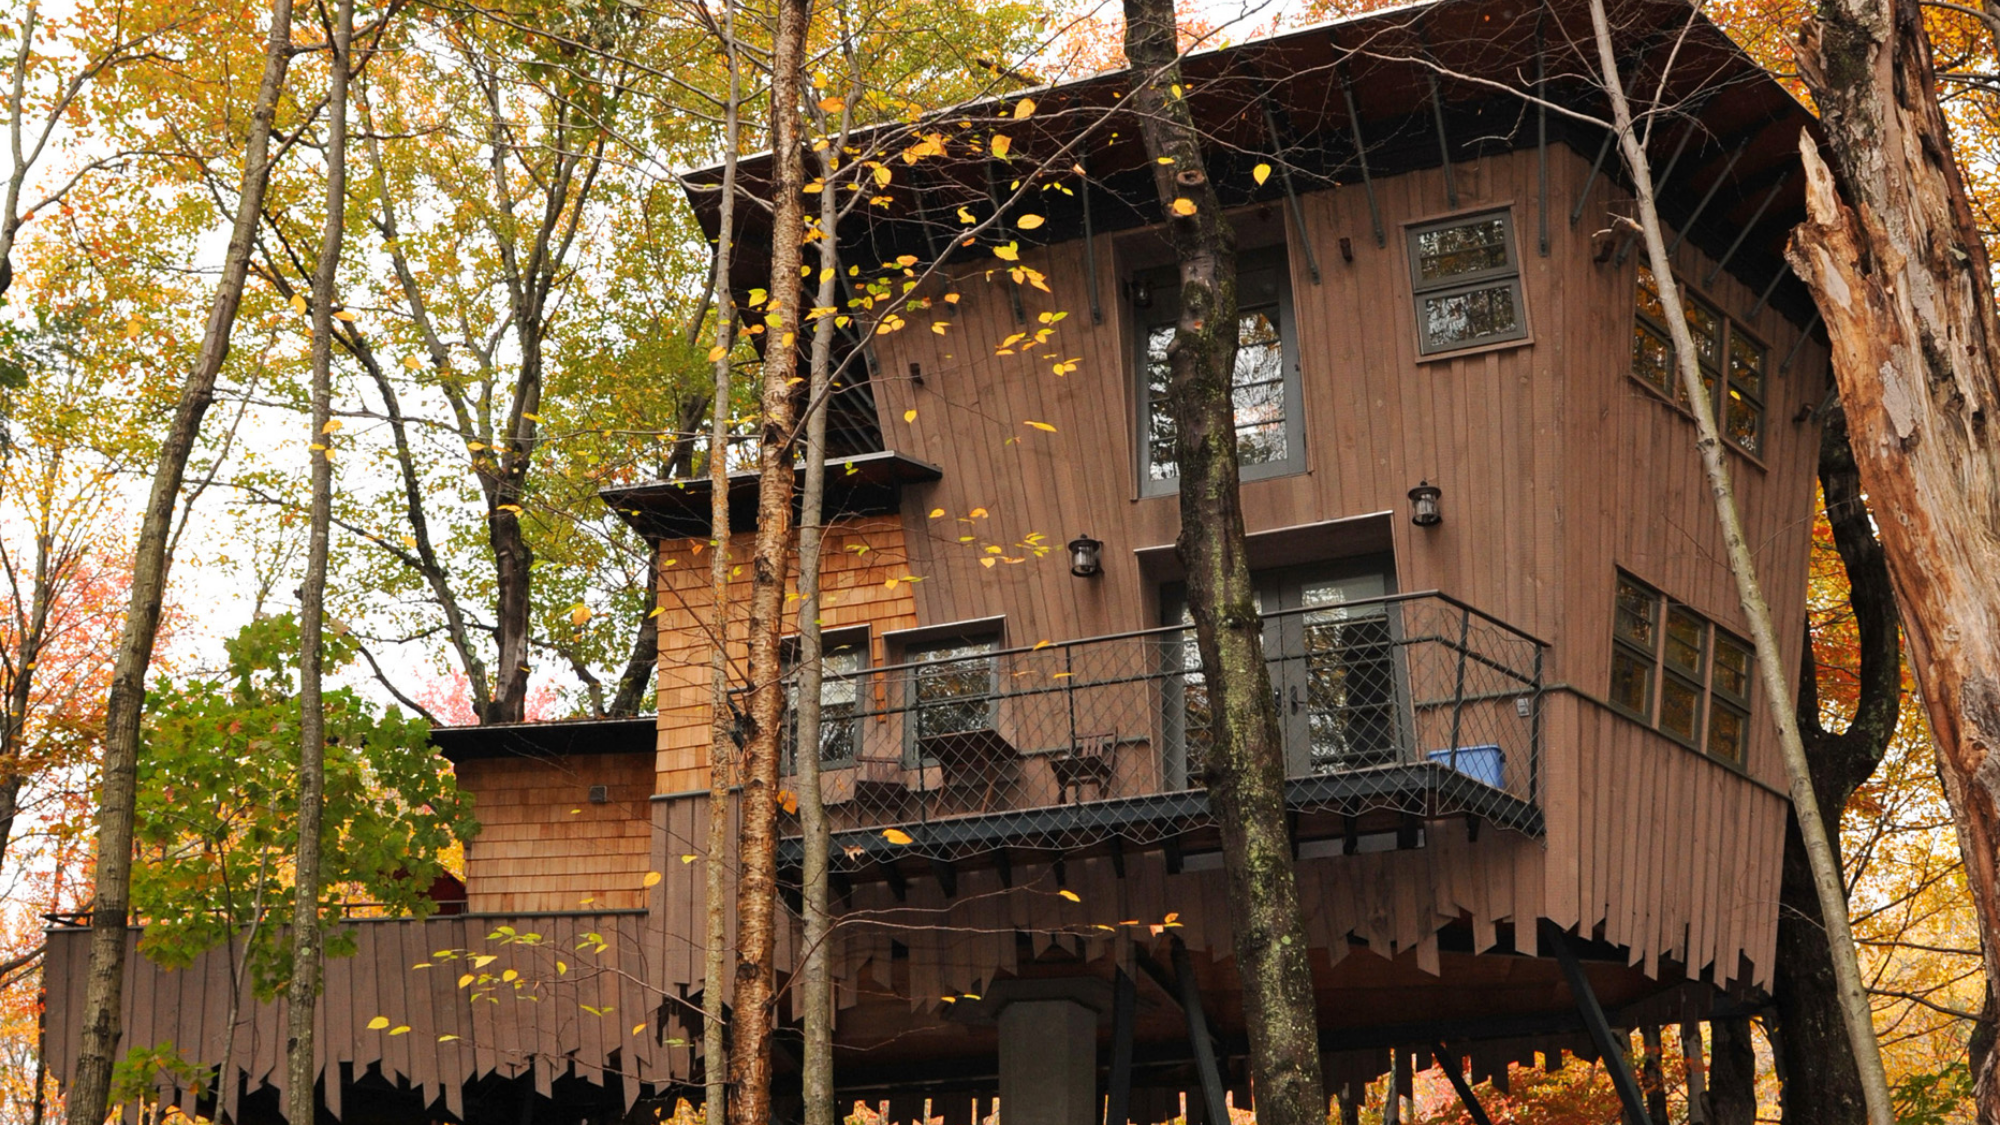 Exterior view of the Treehouse Cottage at Winvian Farm surrounded by autumn foliage.